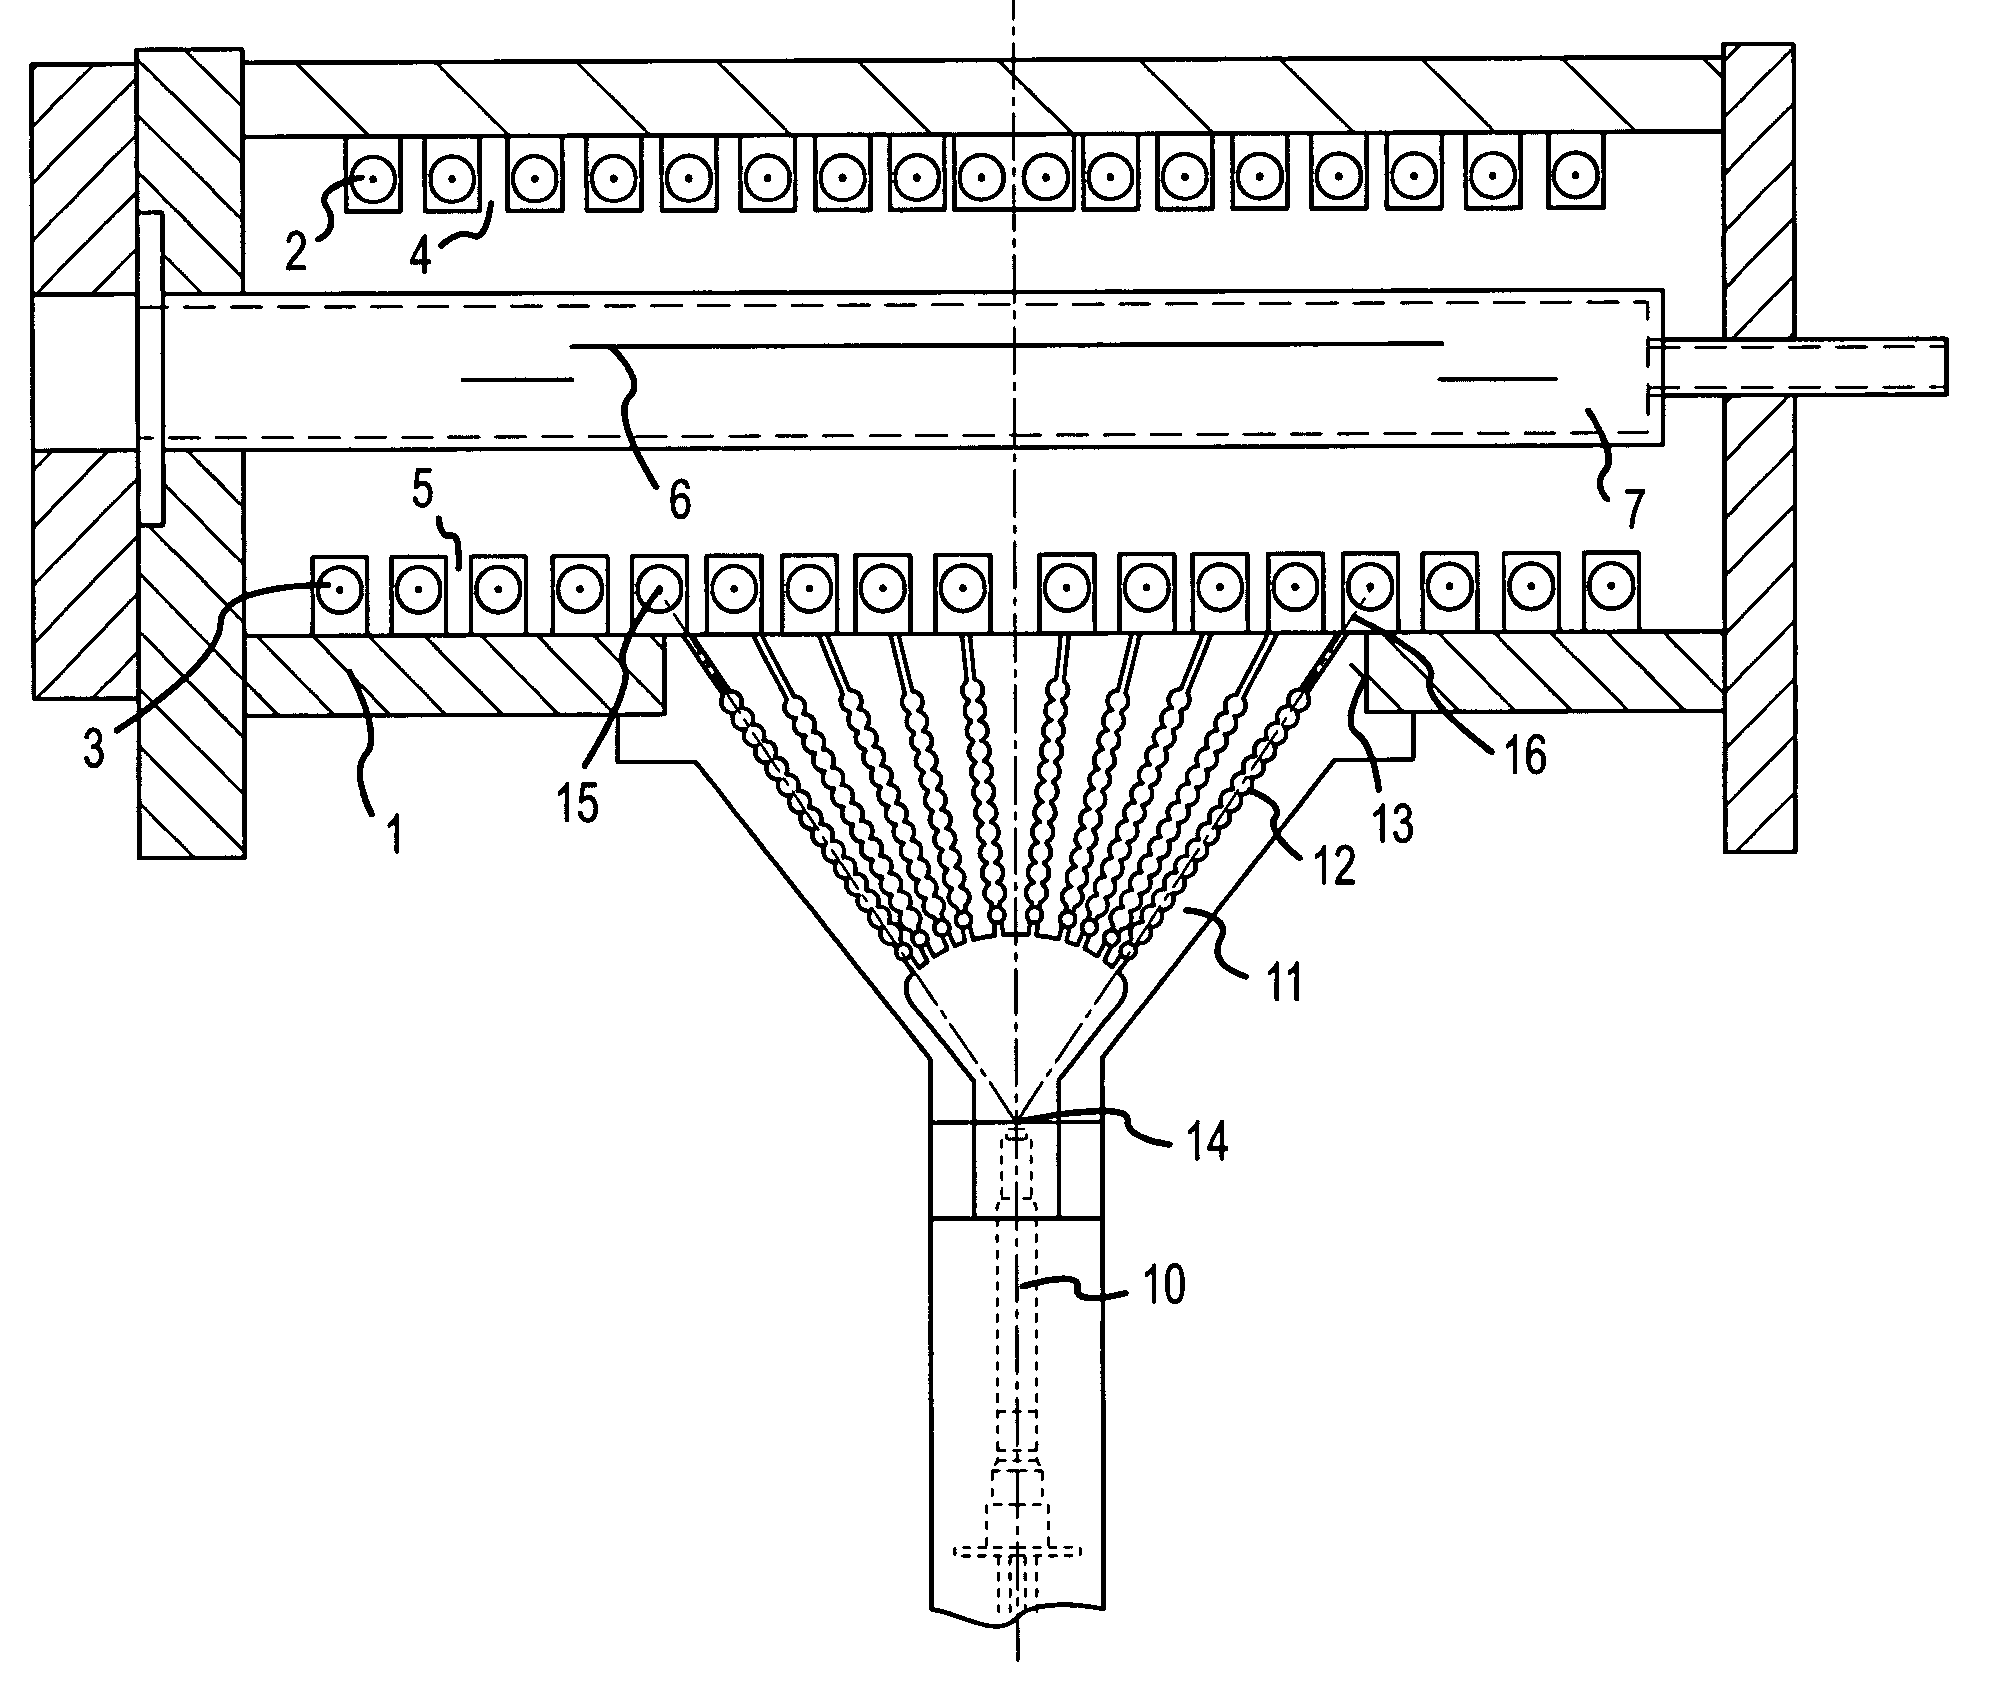 Apparatus and method for measuring the temperature of substrates